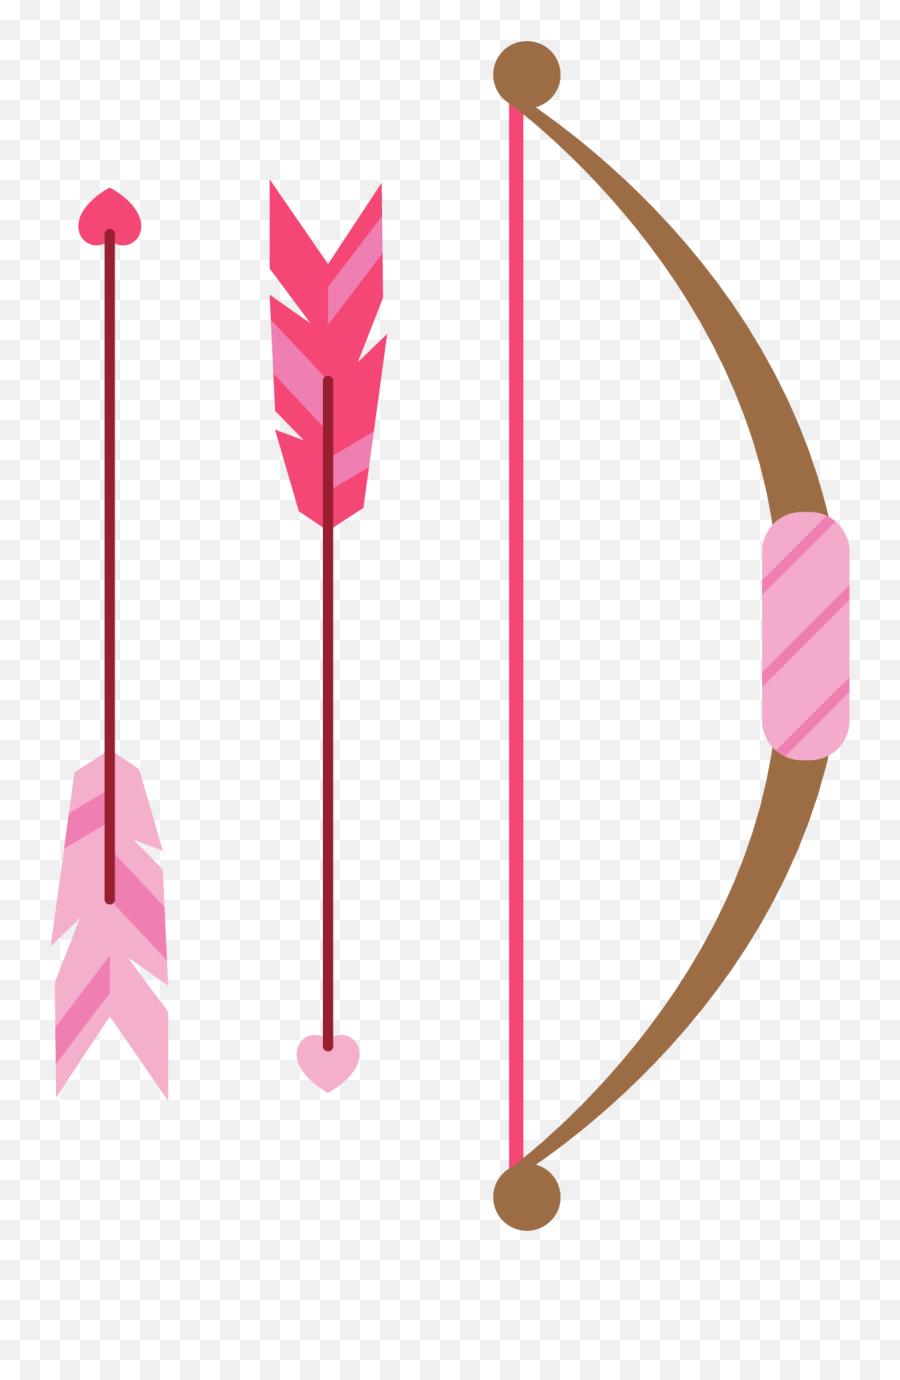 Arrow Feather Clip Art - Arrow With Pink Feather Clipart Pink Feather Arrow Png Emoji,Feather Clipart